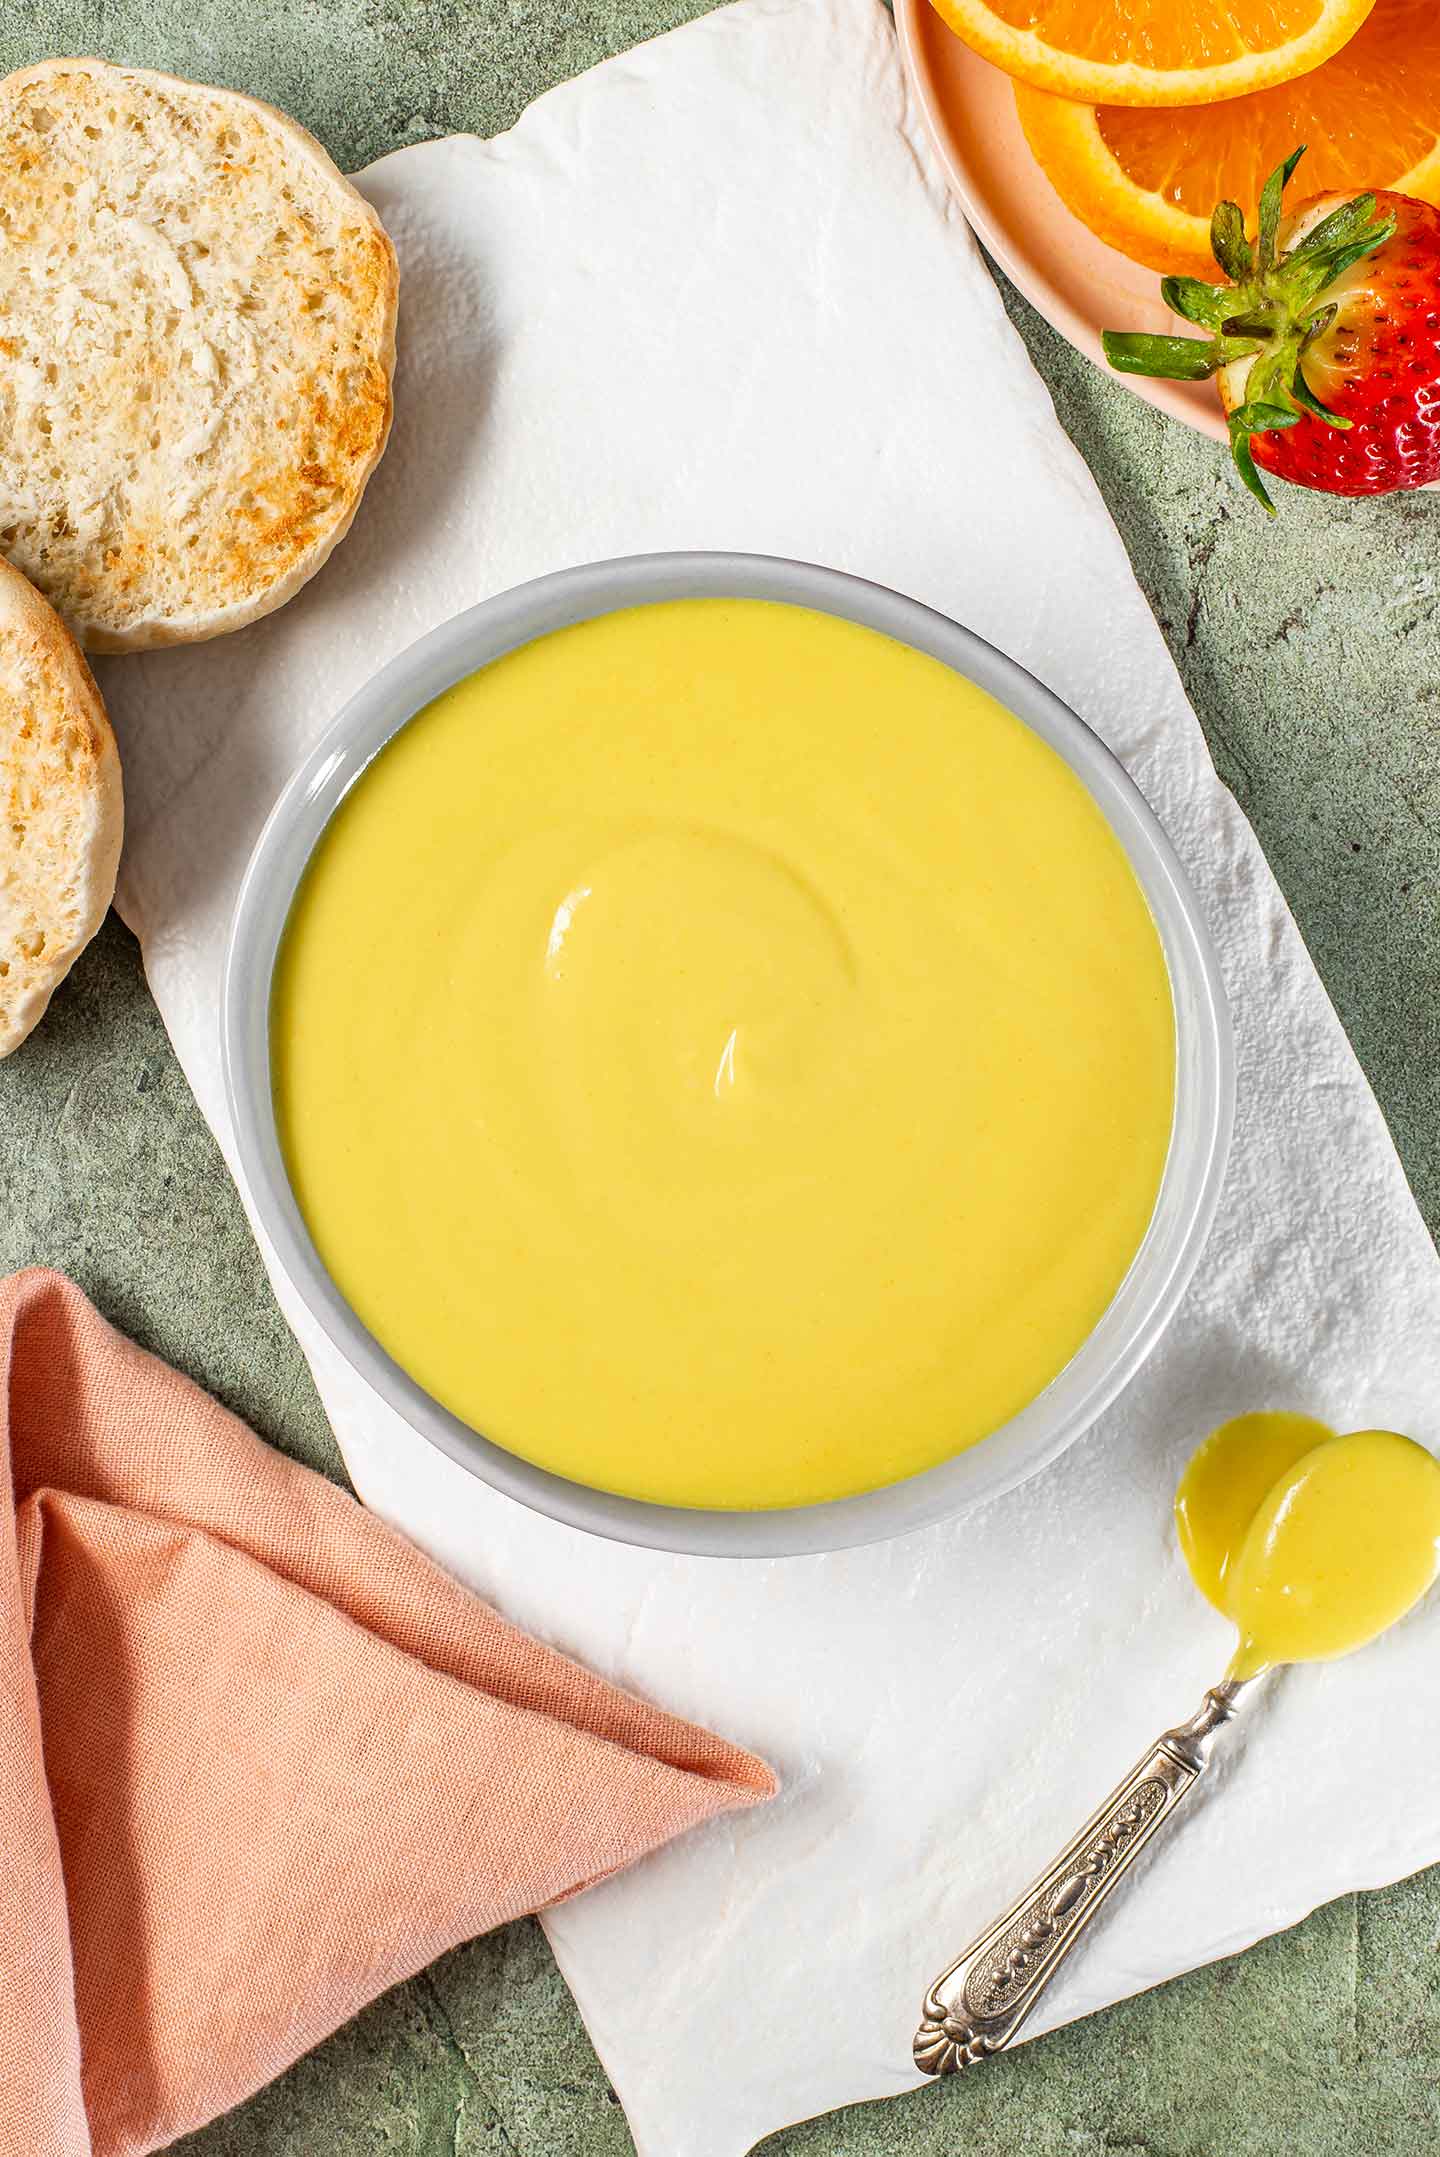 Top down view of vegan hollandaise sauce in a small bowl. The sauce is yellow in colour and thick but pourable.